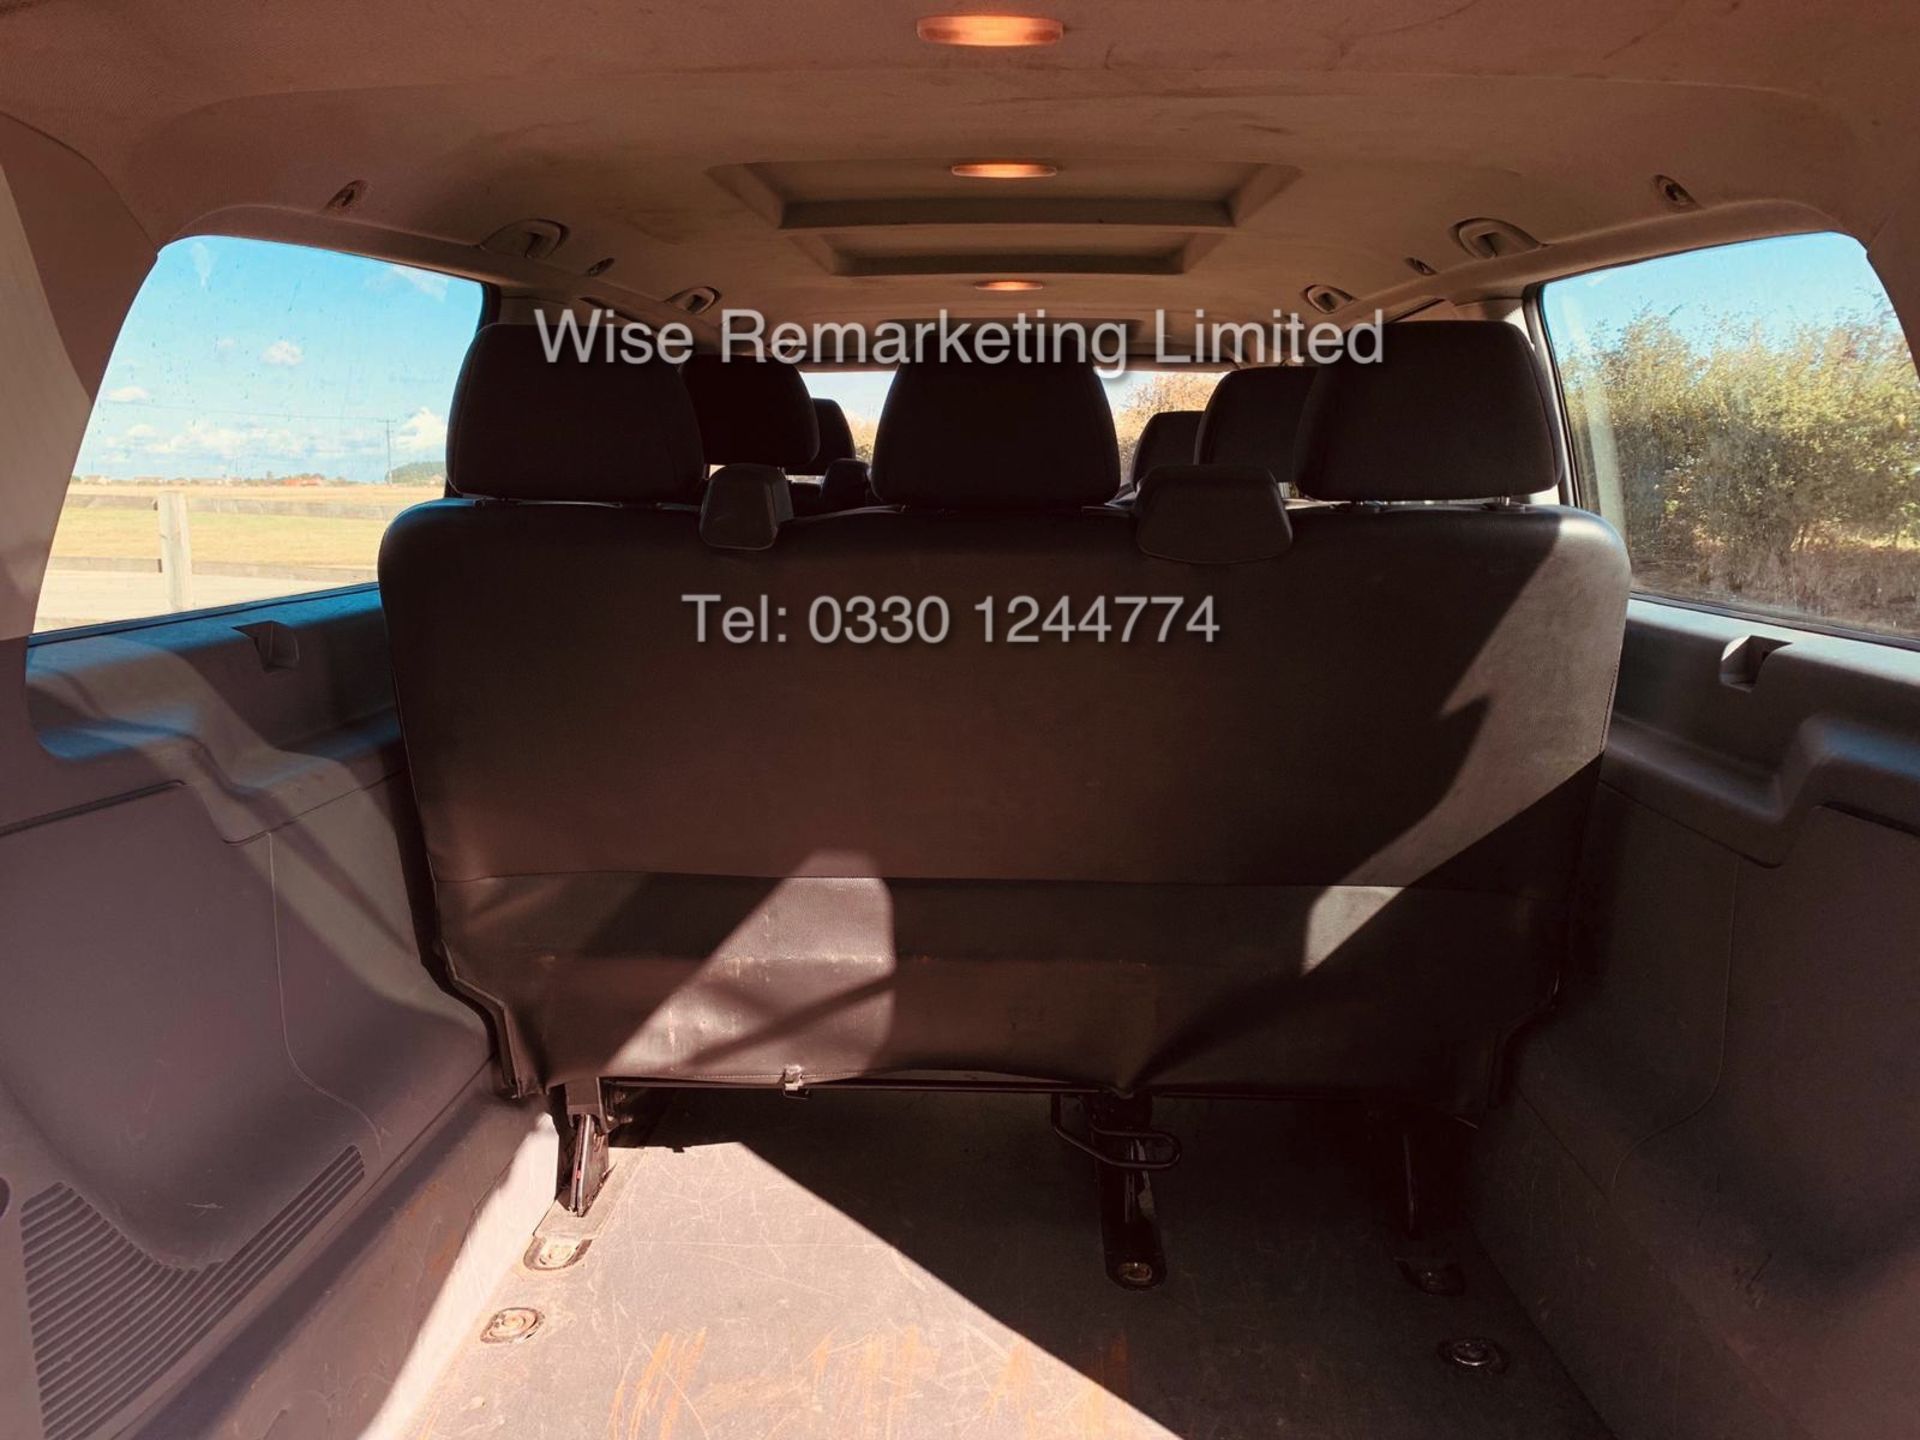 MERCEDES VITO 111 2.1 CDI TRAVELINER **9 SEATER** (2008 08 REG) 1 KEEPER FROM NEW - Image 13 of 19